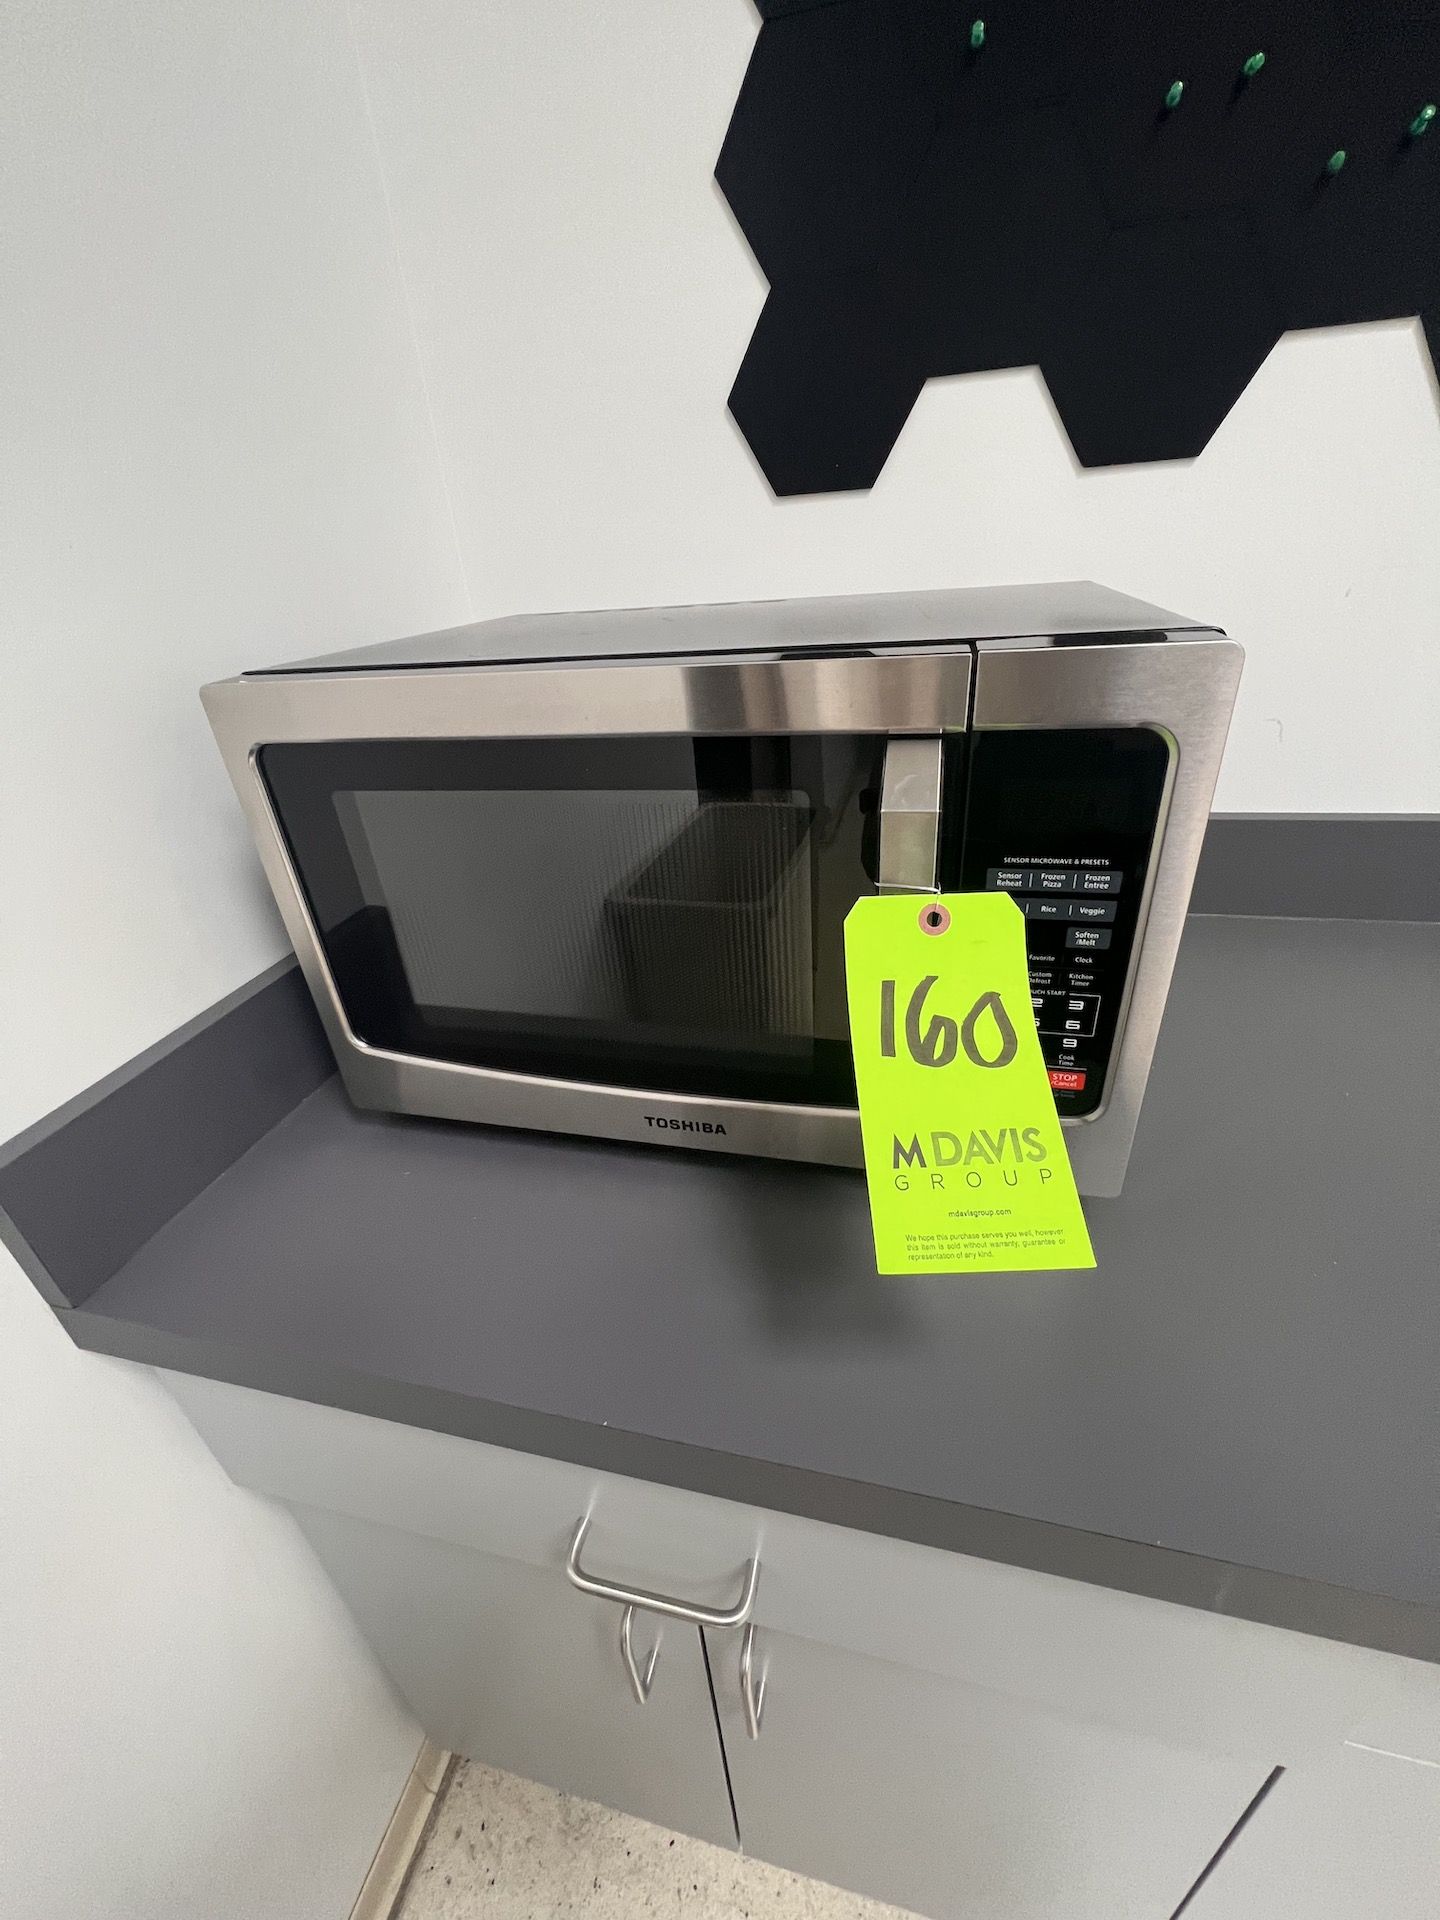 TOSHIBA MICROWAVE (RIGGING & SIMPLE LOADING FEE $20.00) (NOTE: DOES NOT INCLUDE SKIDDING OR